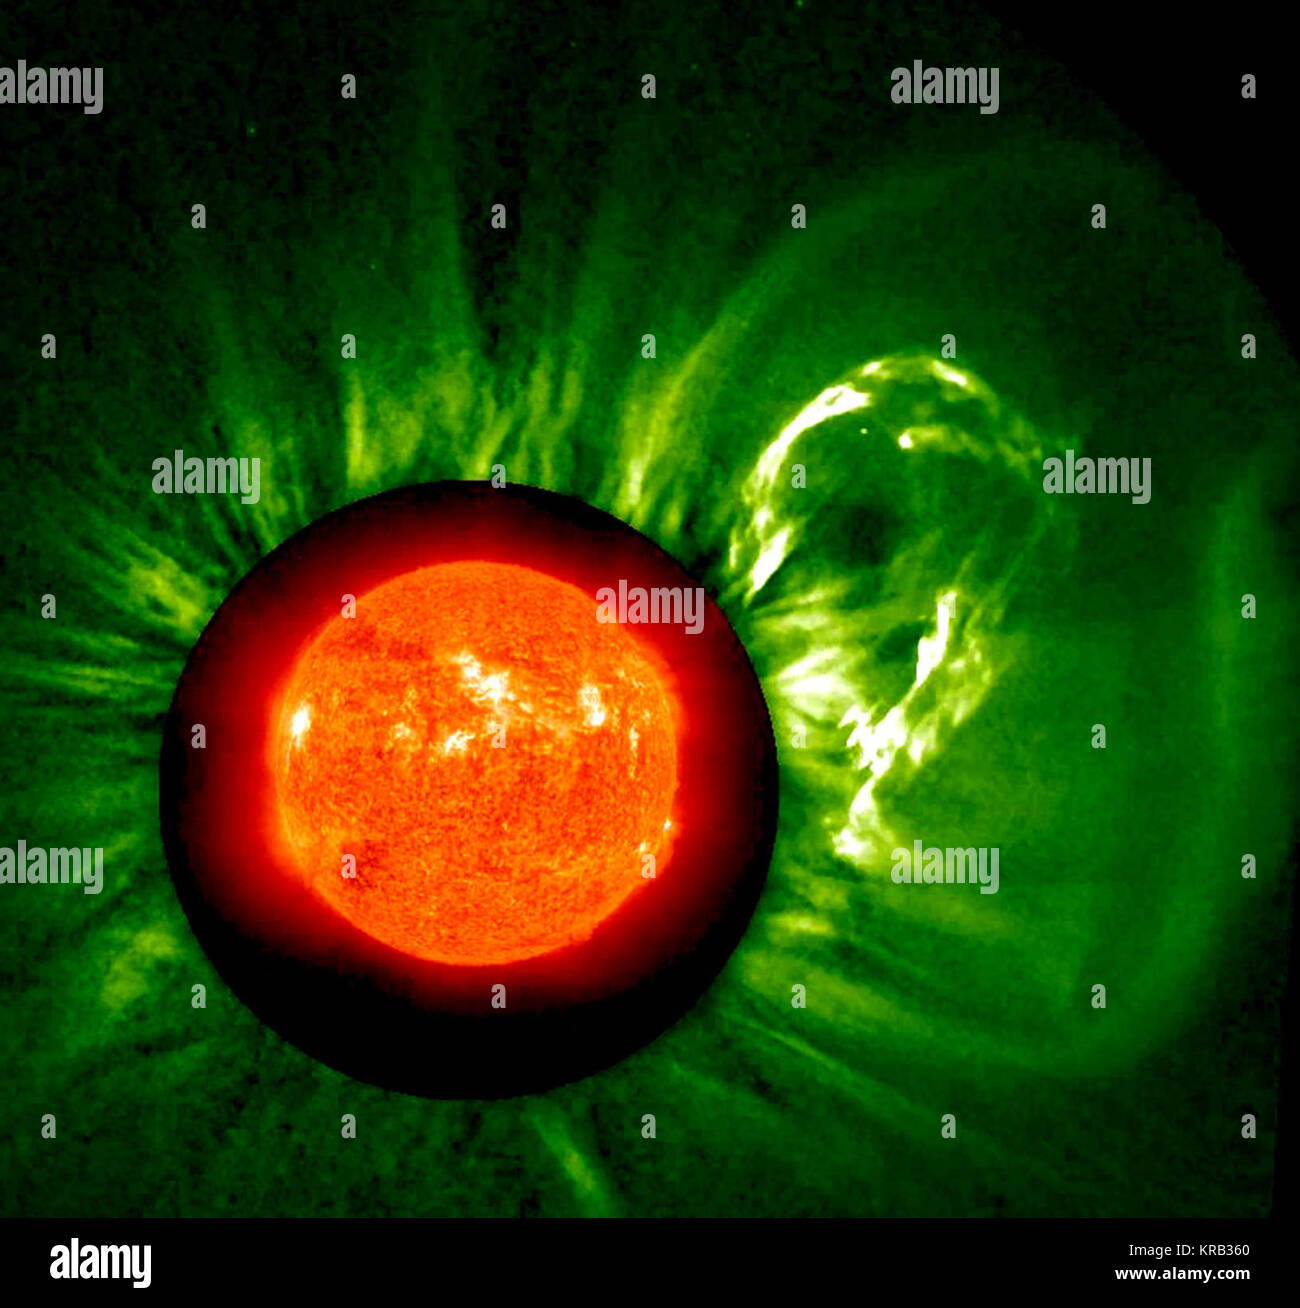 By combining observations from several instruments, we can see an initial solar eruption and the ensuing, large cloud of particles that blasted into space over a 10-hour period (Feb. 9-10, 2012). A close look at the orange-colored Sun image in extreme UV light shows a filament that broke away from the Sun to the right. This event was associated with a bright coronal mass ejection (CME) starting around 18:00 UT as seen by the STEREO Behind spacecraft. This eruption also occurred in conjunction with a B3.7 flare (fairly small). One combination of observations shows just the Sun in extreme UV lig Stock Photo